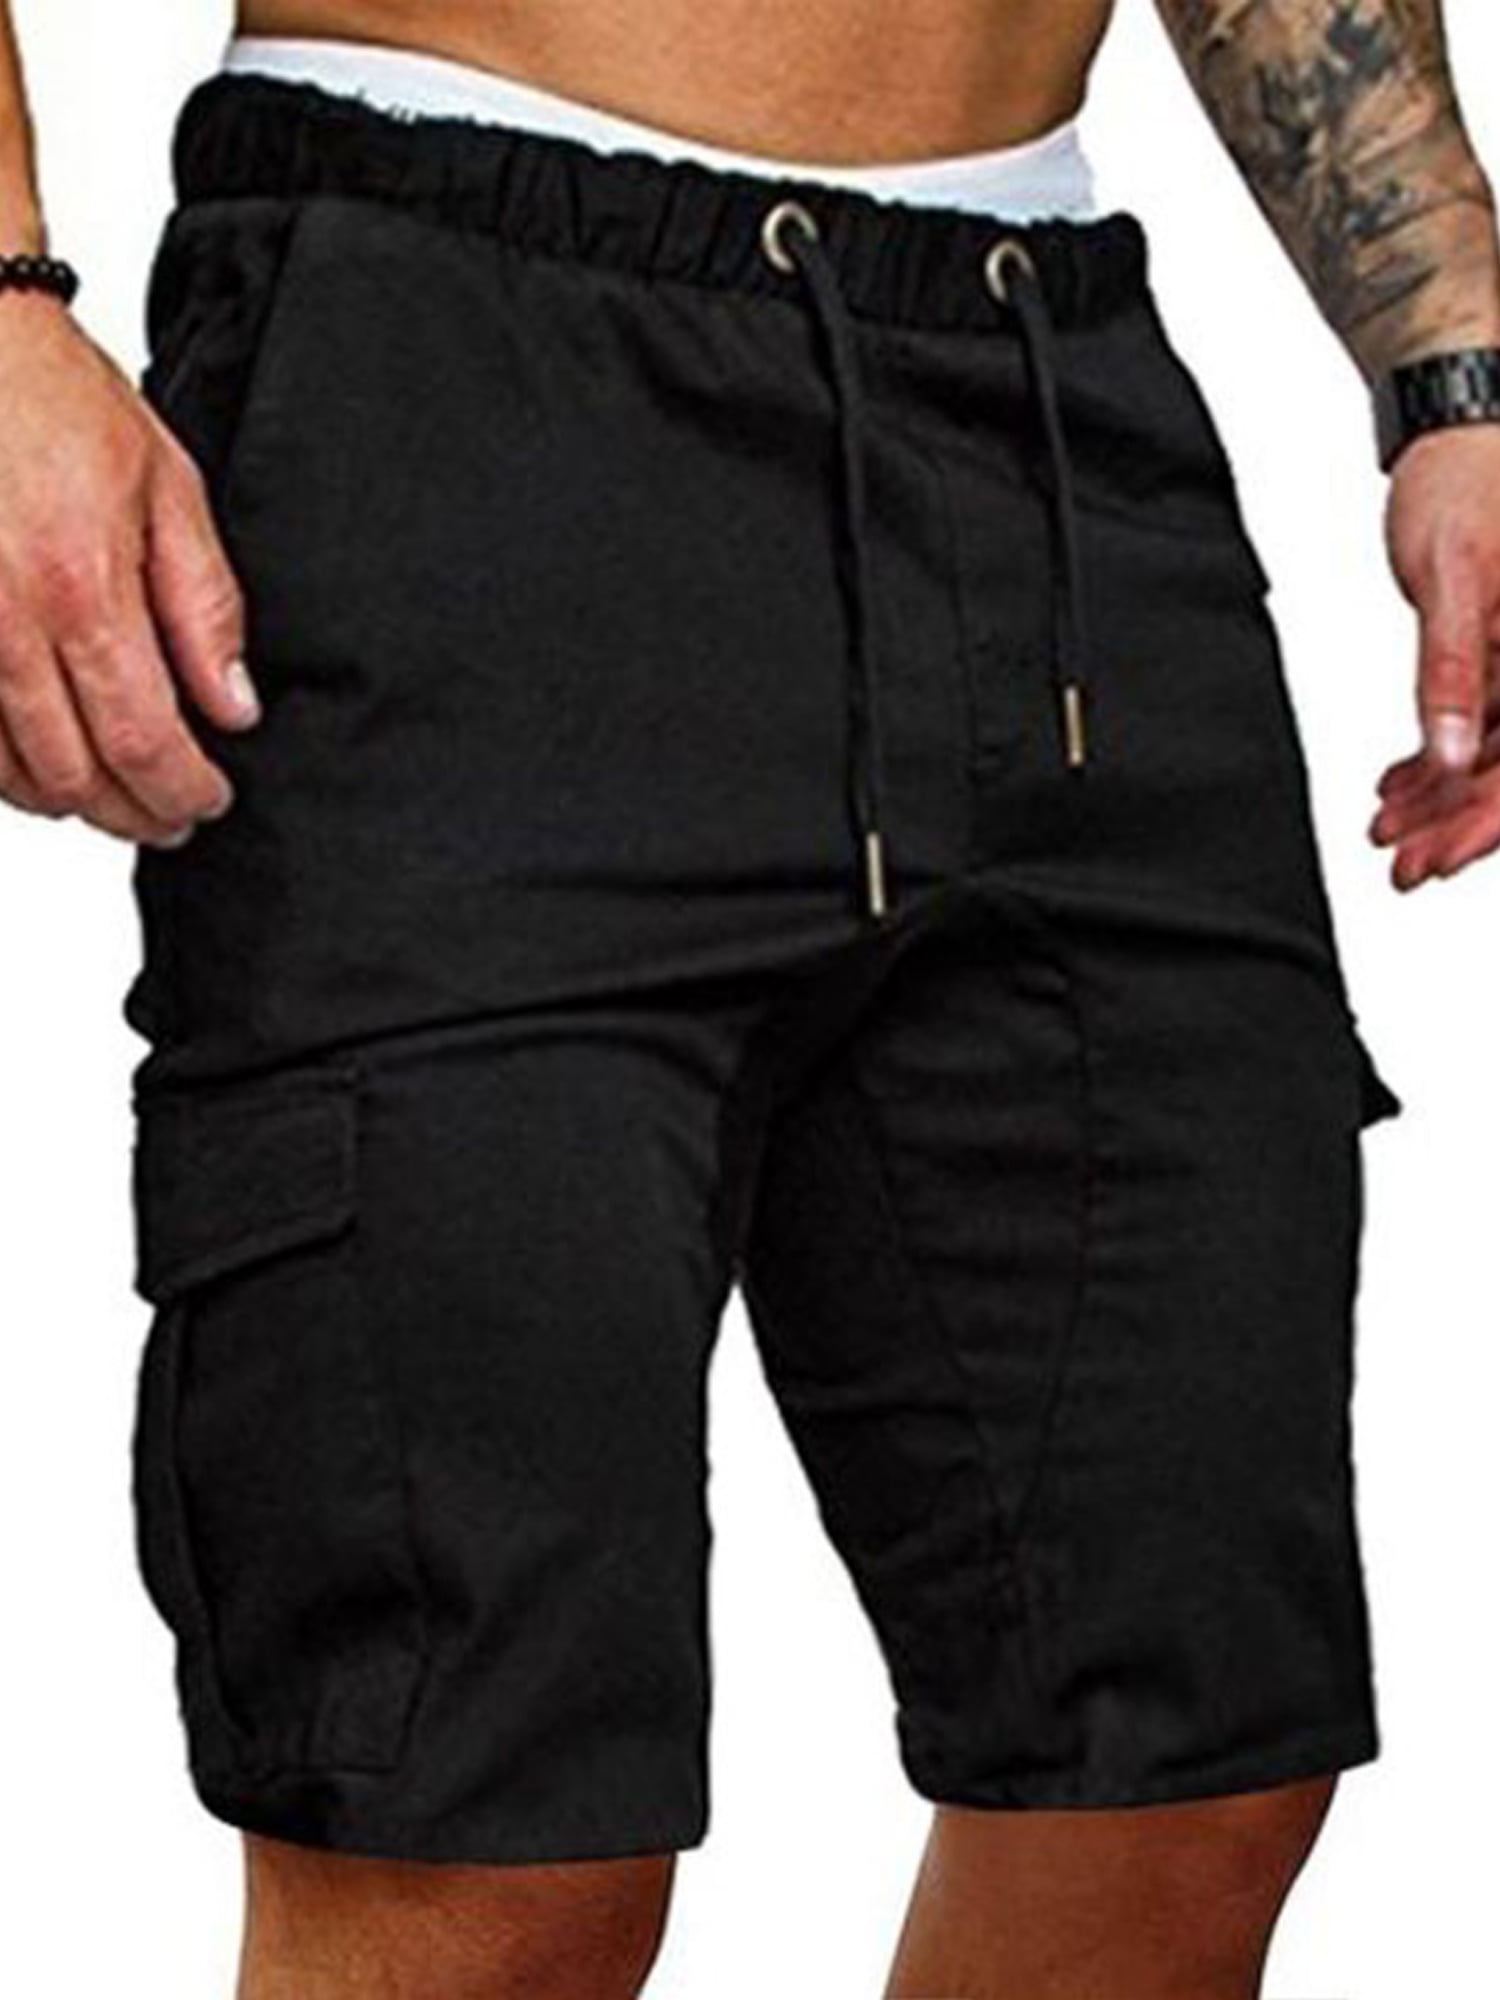 New Mens Military Cargo Combat Shorts Summer Short Pants Outdoor Casual Trousers 